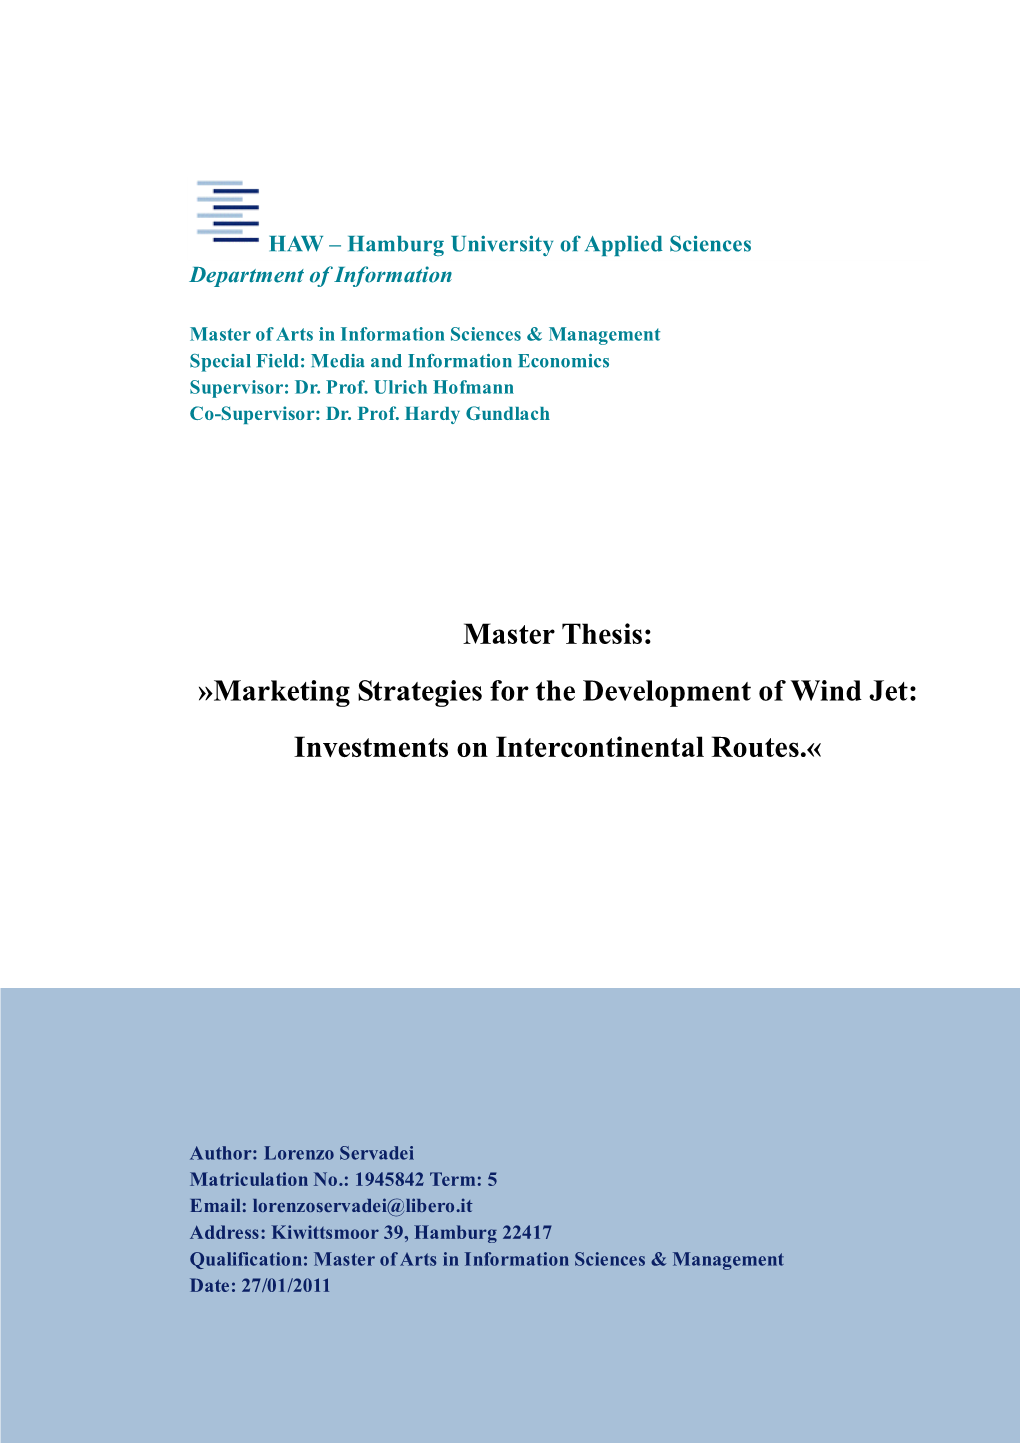 Master Thesis: »Marketing Strategies for the Development of Wind Jet: Investments on Intercontinental Routes.«